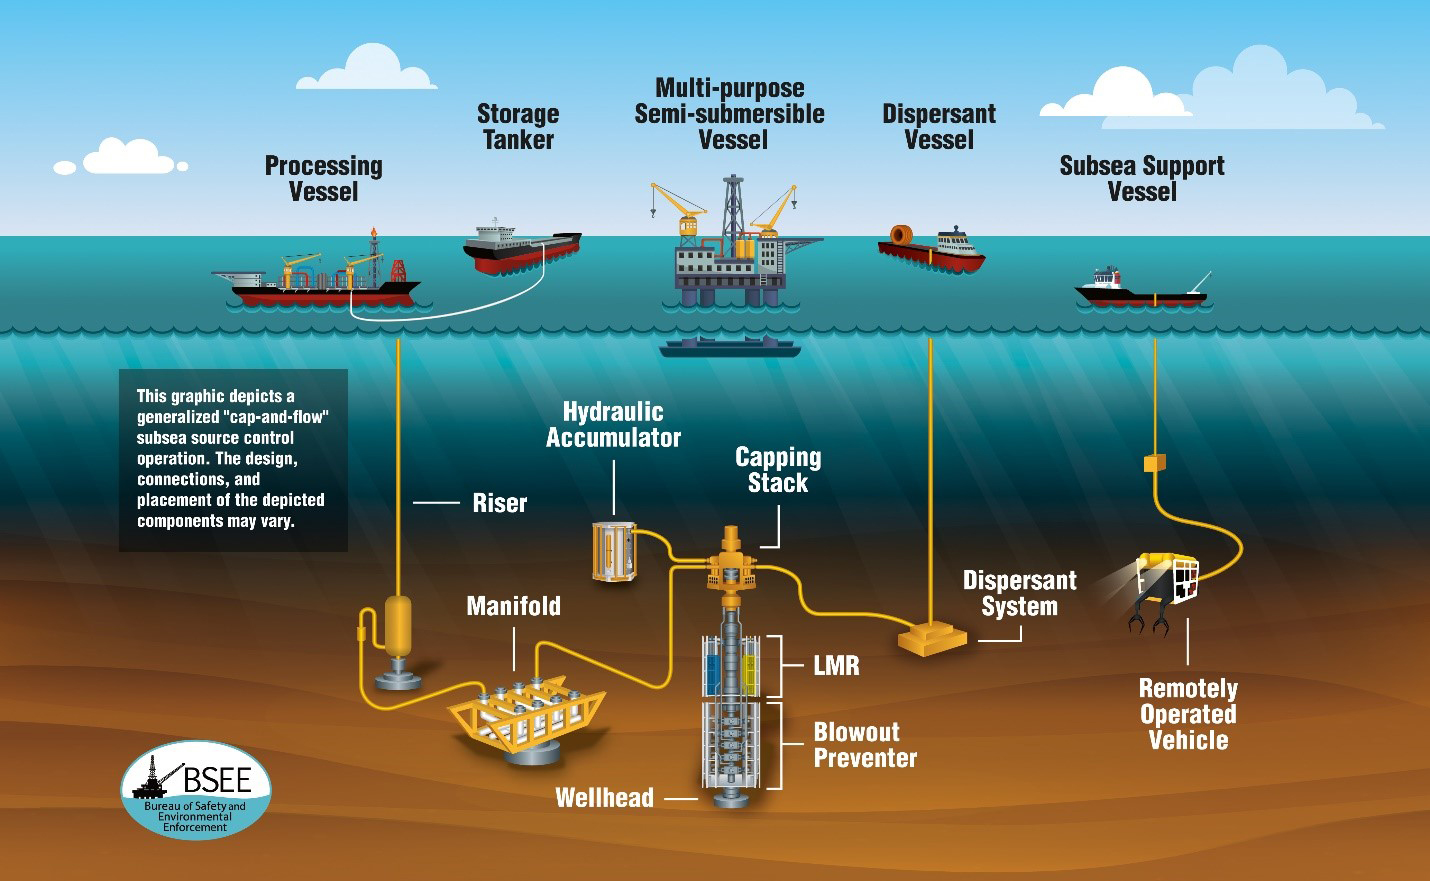 This figure presents a theoretical subsea spill response operation for which BSEE would provide support and expertise within the National Response System.